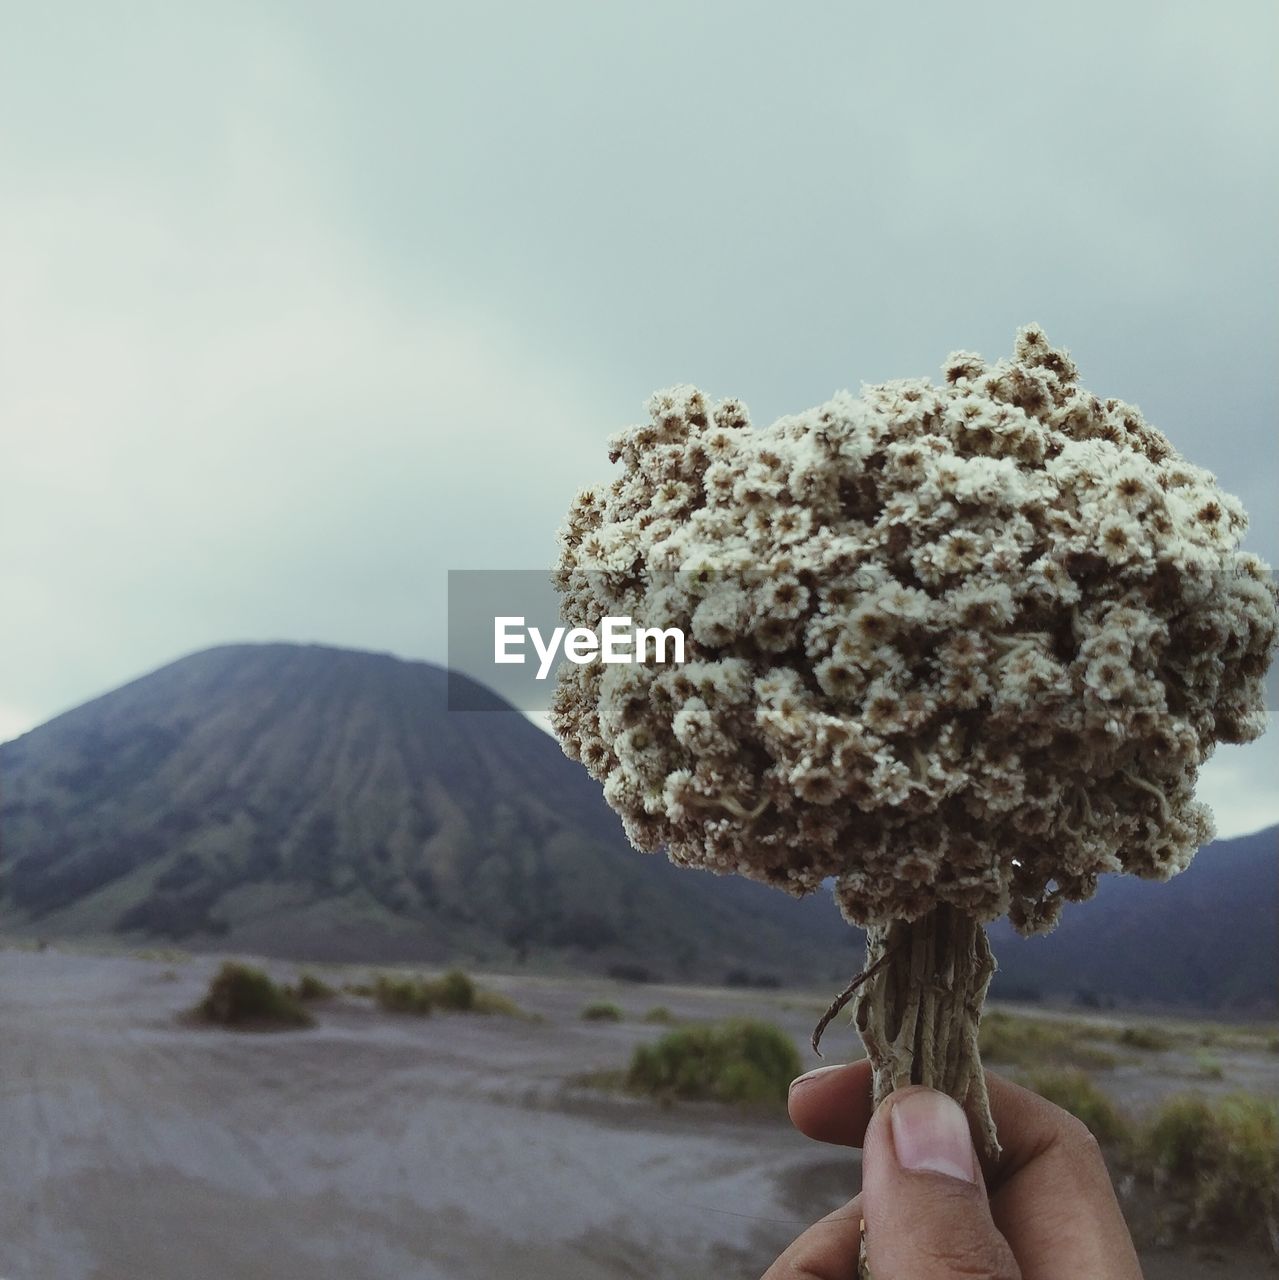 Edelwis flowers and the top of mount bromo are soothing to the soul